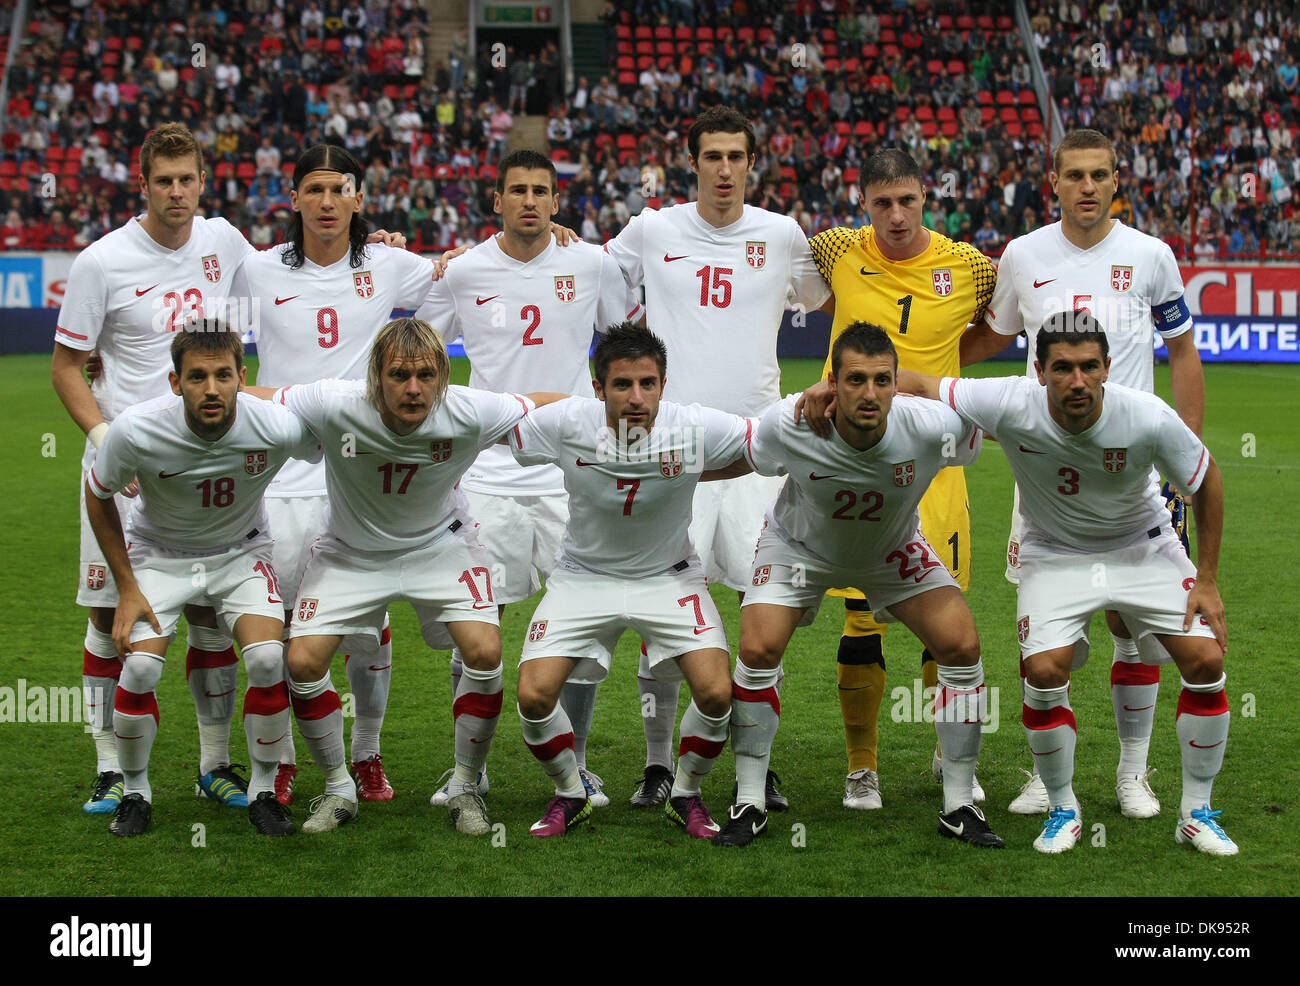 Aug 10, 2011 - Moscow, Russia - Serbia national team at the International friendly match Russia vs Serbia which Russia won 1:0. (Credit Image: © Aleksander V. Chernykh/PhotoXpress/ZUMAPRESS.com) Stock Photo